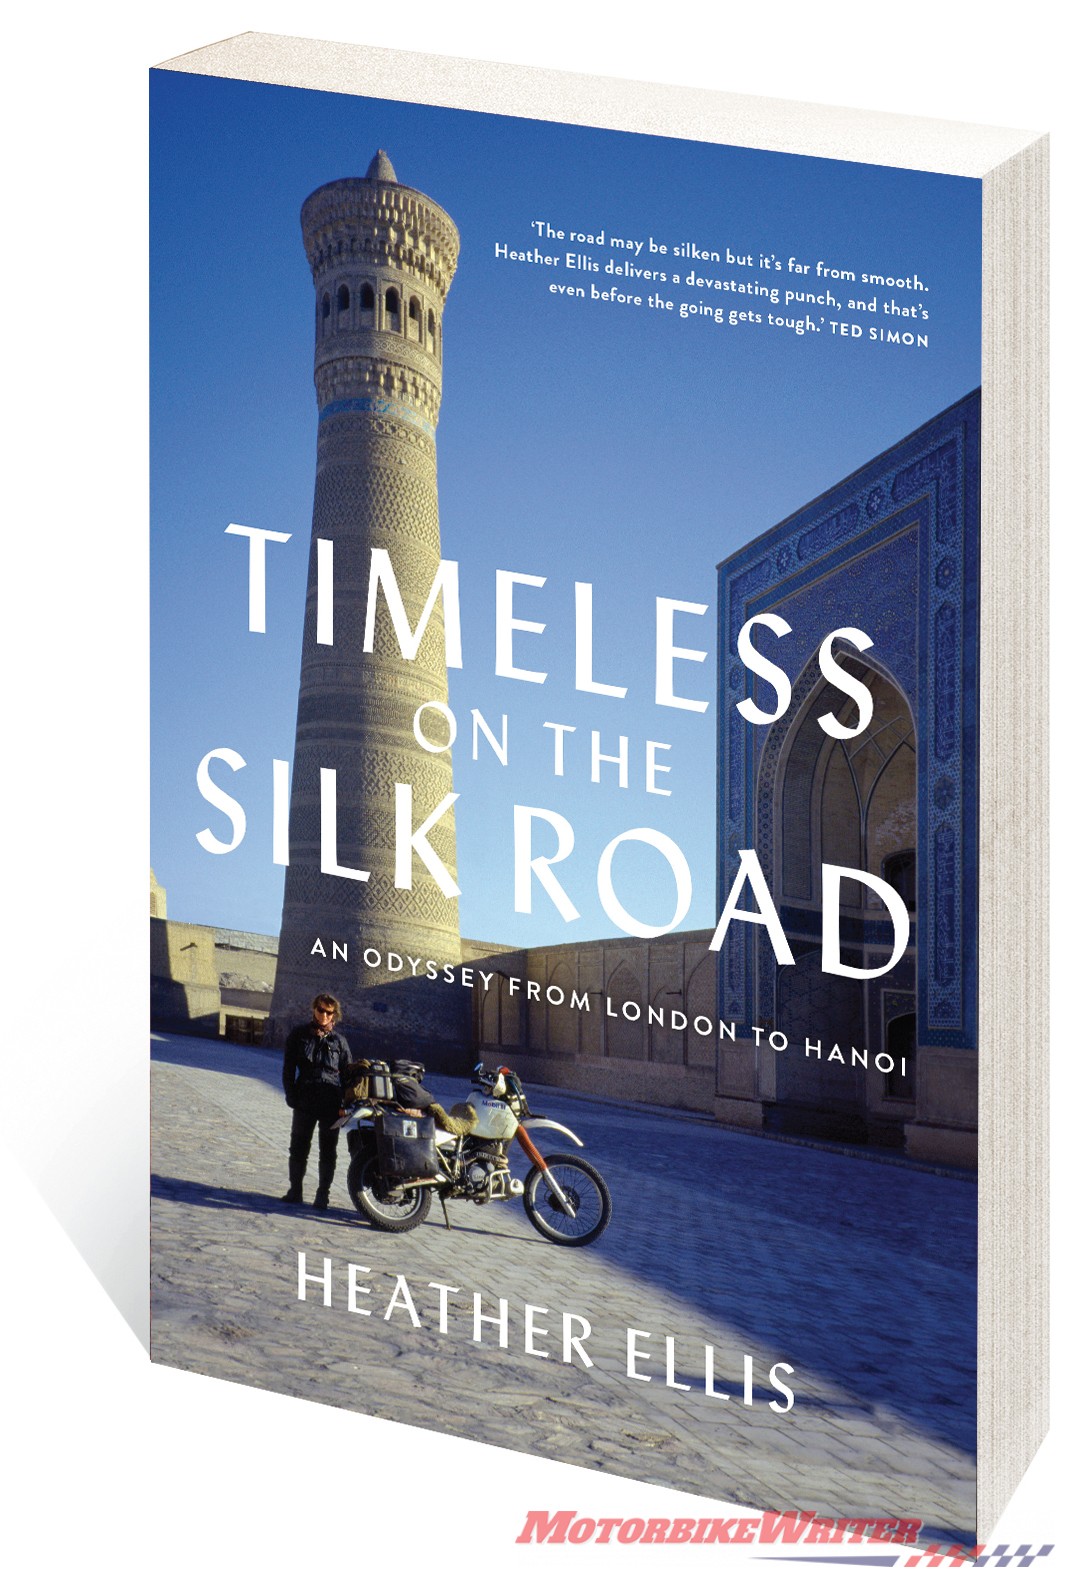 heather ellis Timeless On The Silk Road: An Odyssey From London to Hanoi.